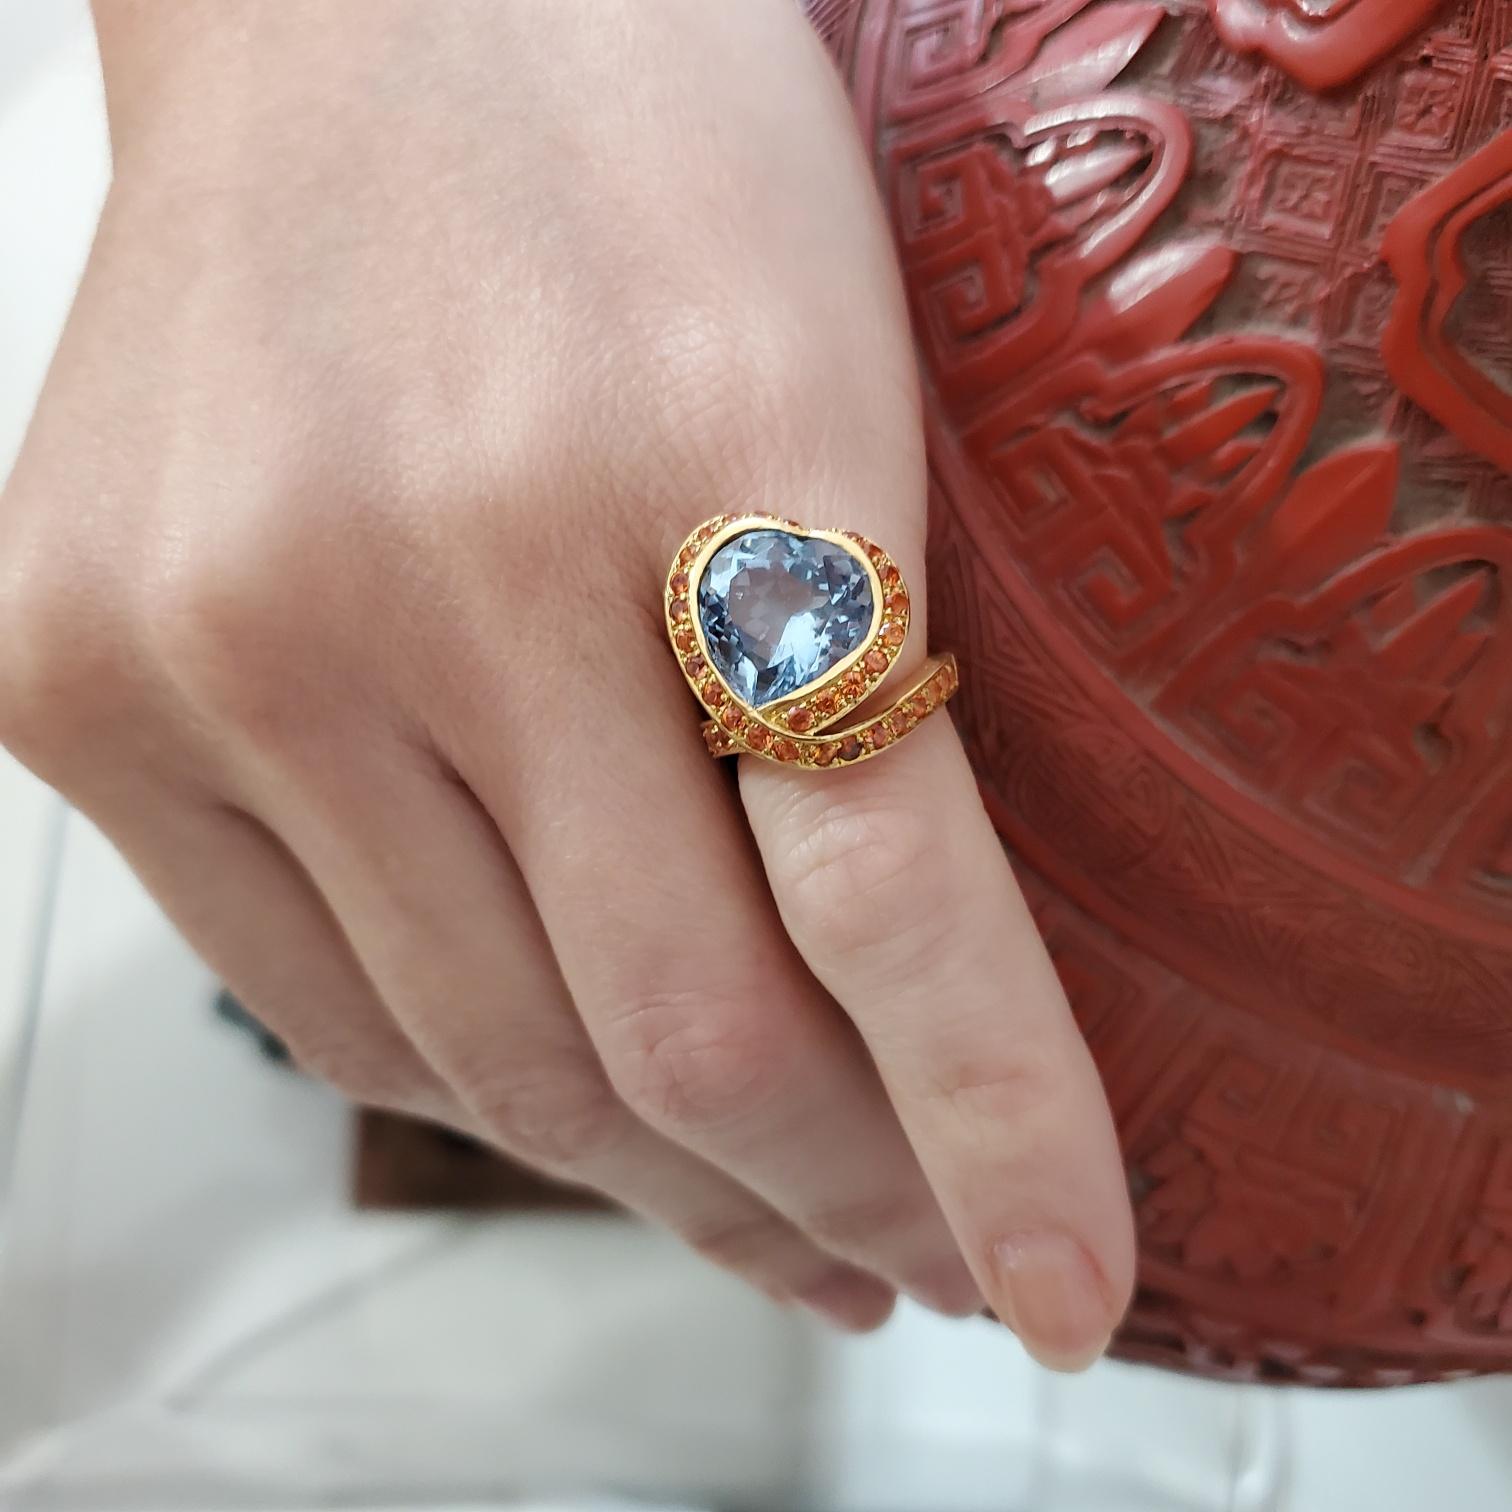 A cocktail ring designed by Nardi.

Rare vintage piece, created in Venice Italy by the iconic and exclusive Venetian jewelry house of Nardi. This unique one-of-a-kind cocktail ring has been carefully crafted in solid yellow gold of 18 karats with